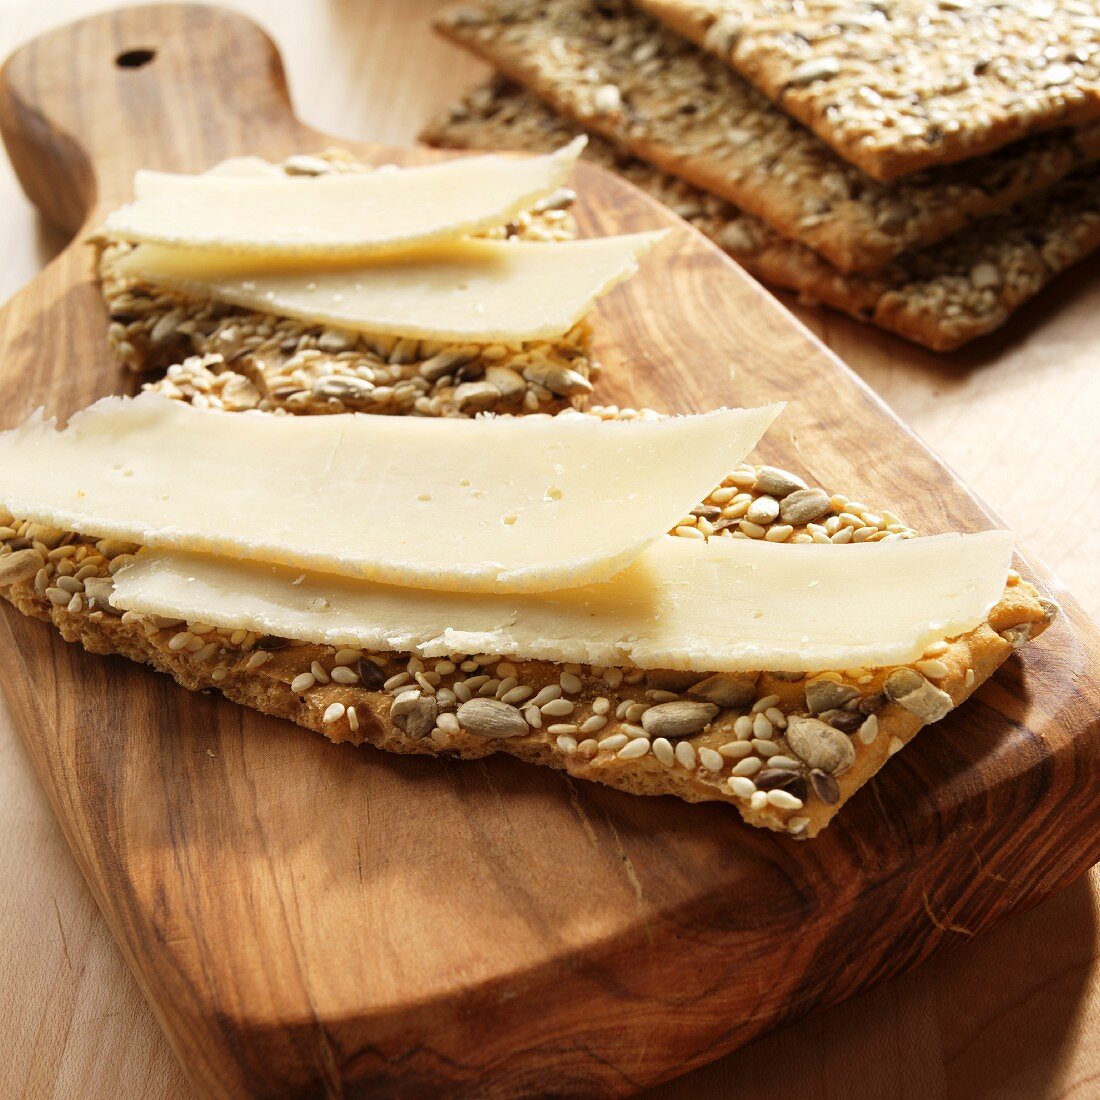 Slices of Asiago Cheese on Multi-Seed Crackers